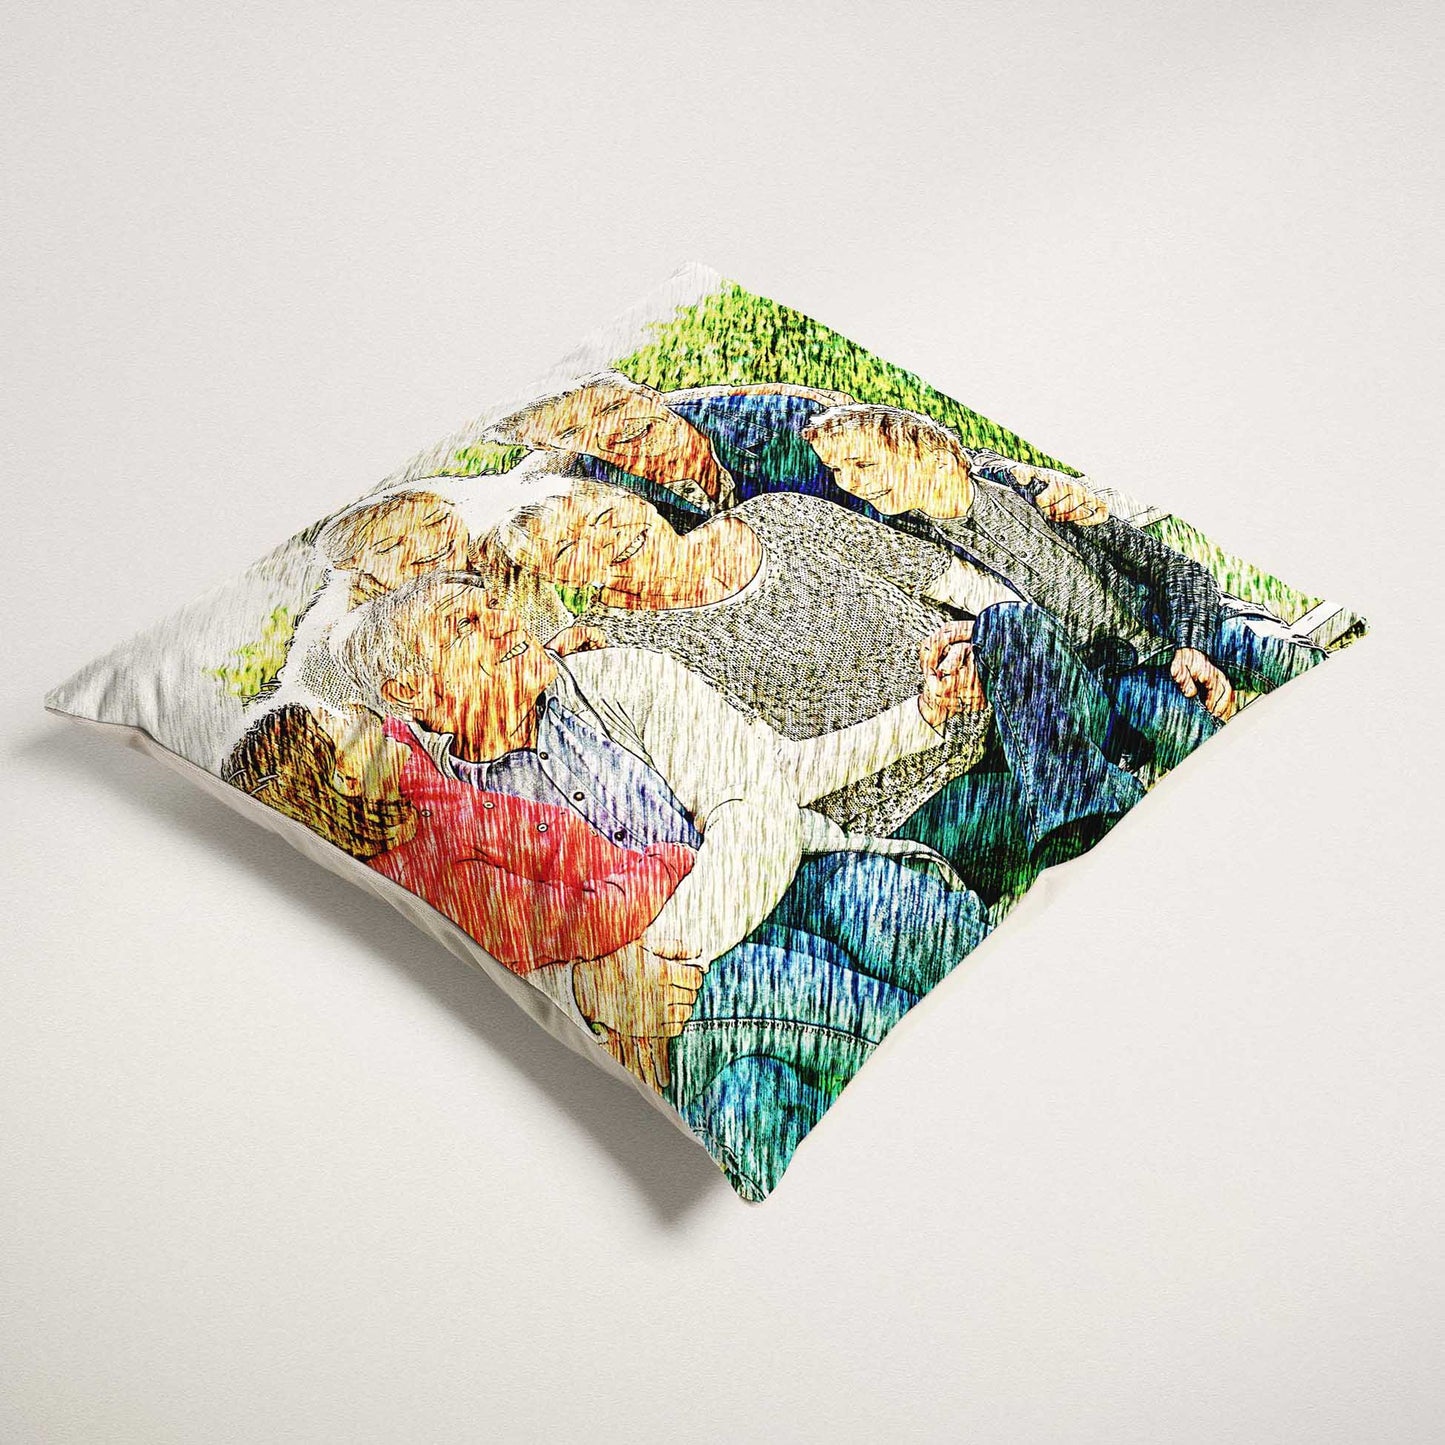 Create a truly custom and artistic atmosphere with our Artsy Illustration Cushion. Crafted from luxurious fabric and boasting a bespoke print, it adds a unique flair to your home decor. The soft velvet texture enhances its comfort